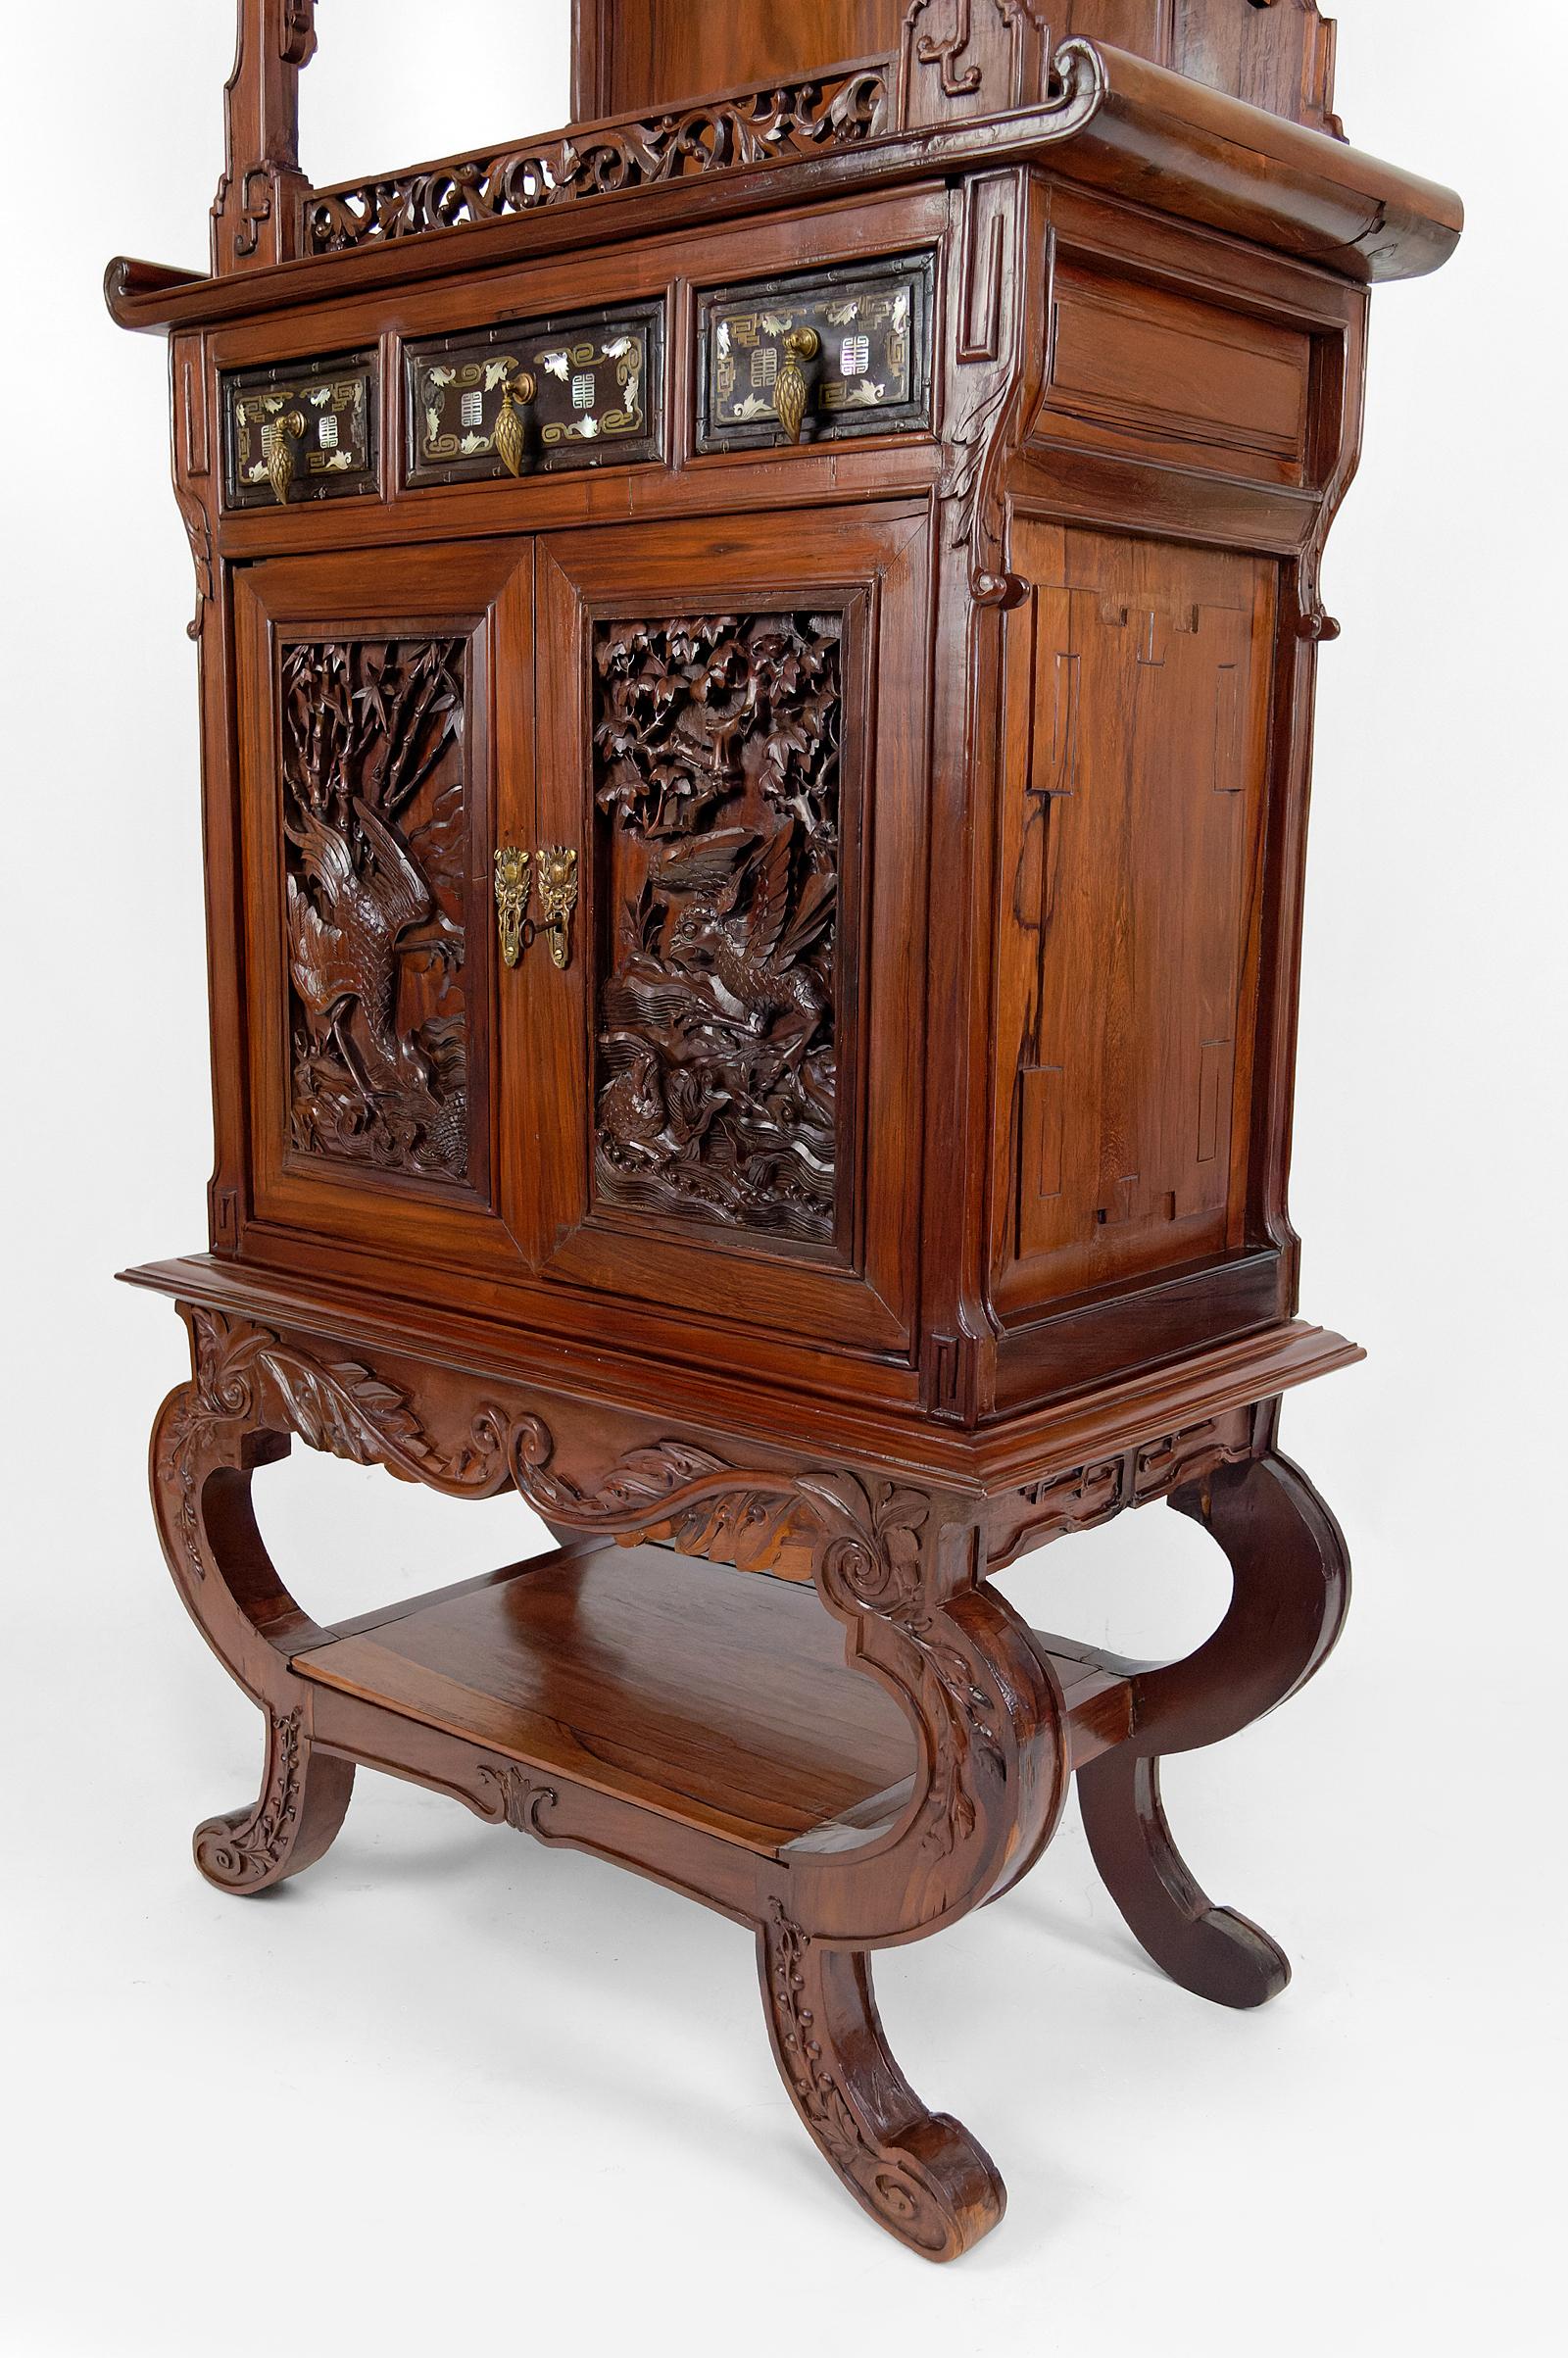 Important Asian Cabinet in carved wood, Vietnam or China, Circa 1880 For Sale 2